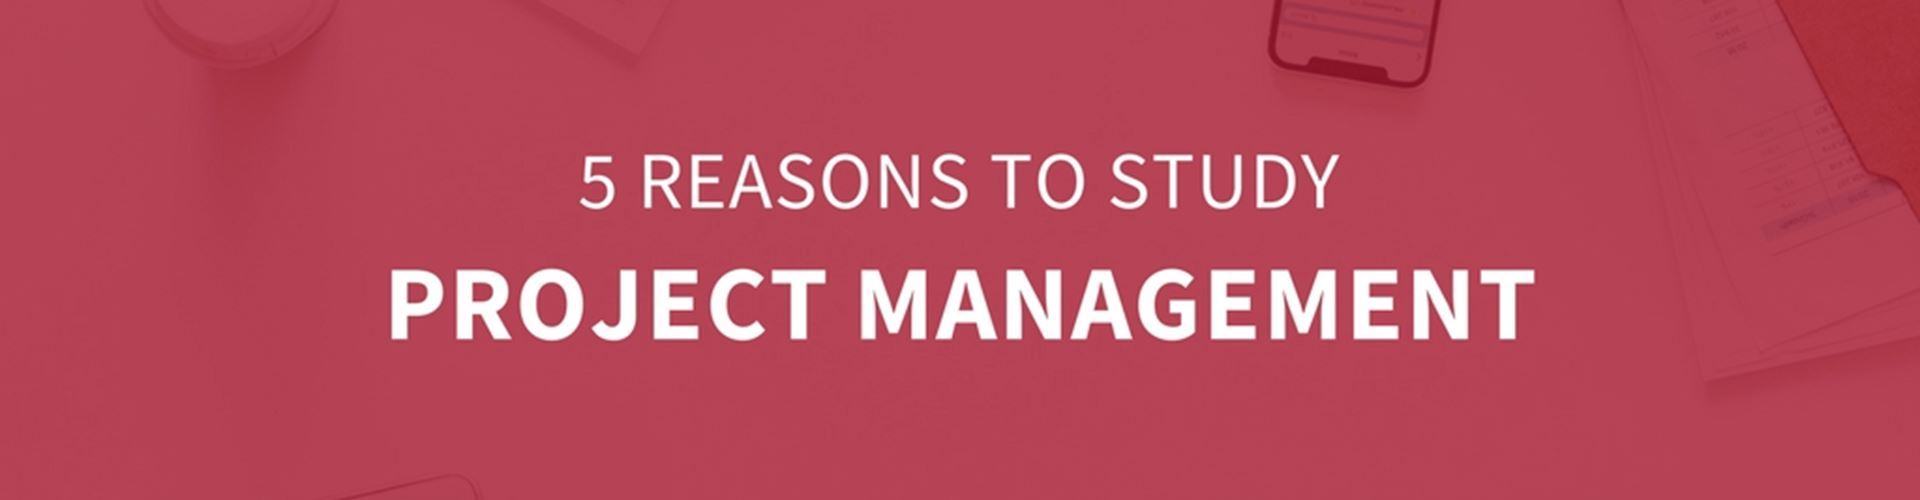 Five reasons to study project management